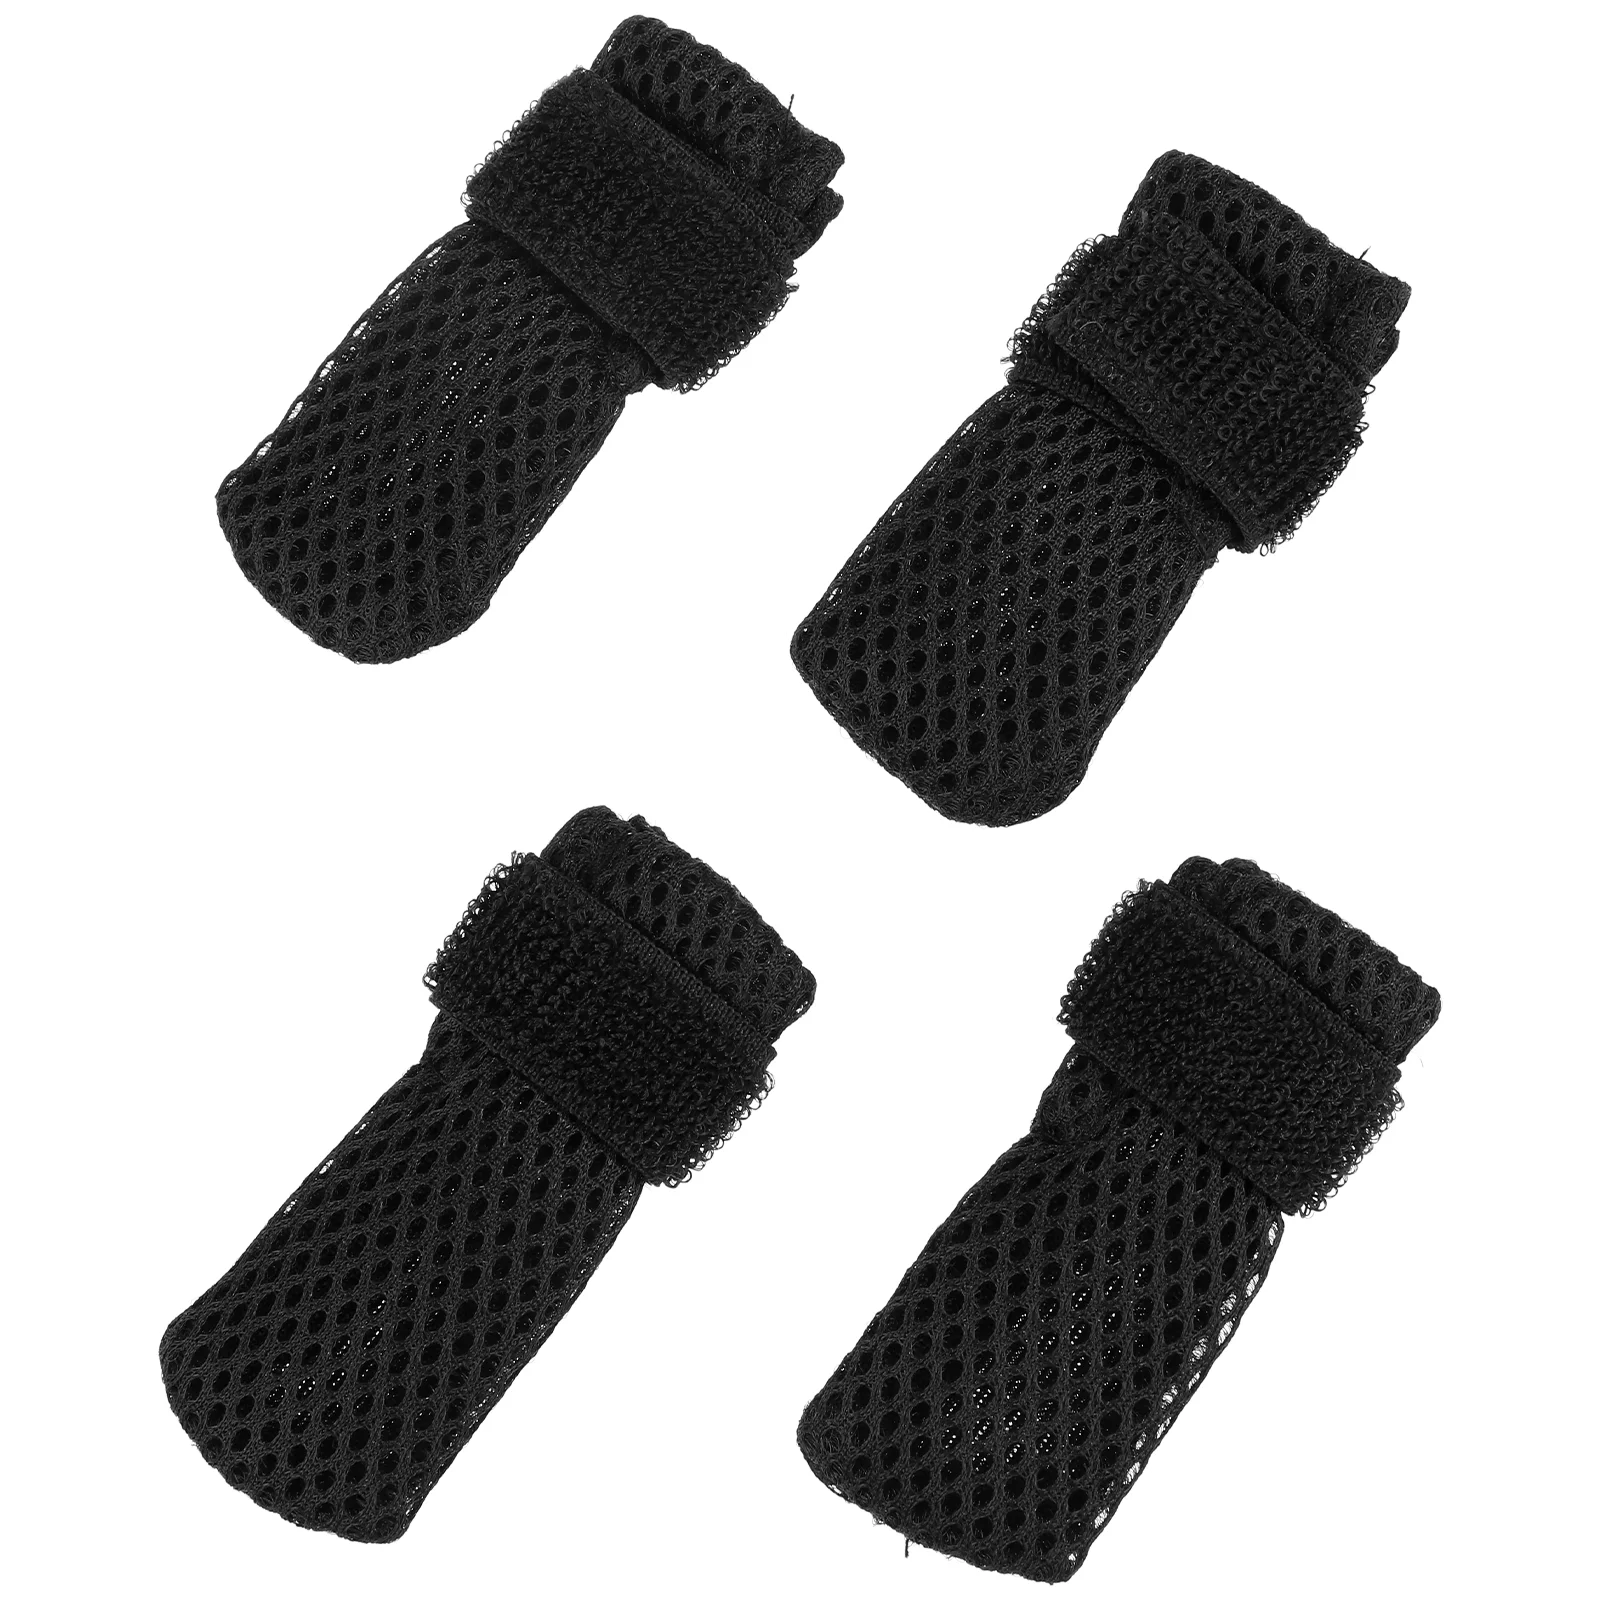 

Anti Scratch Cat Shoes Nail Cover Cat Paw Protector 4Pcs Precaution Scratch Gloves Grooming Bathing Shaving Checking Booties